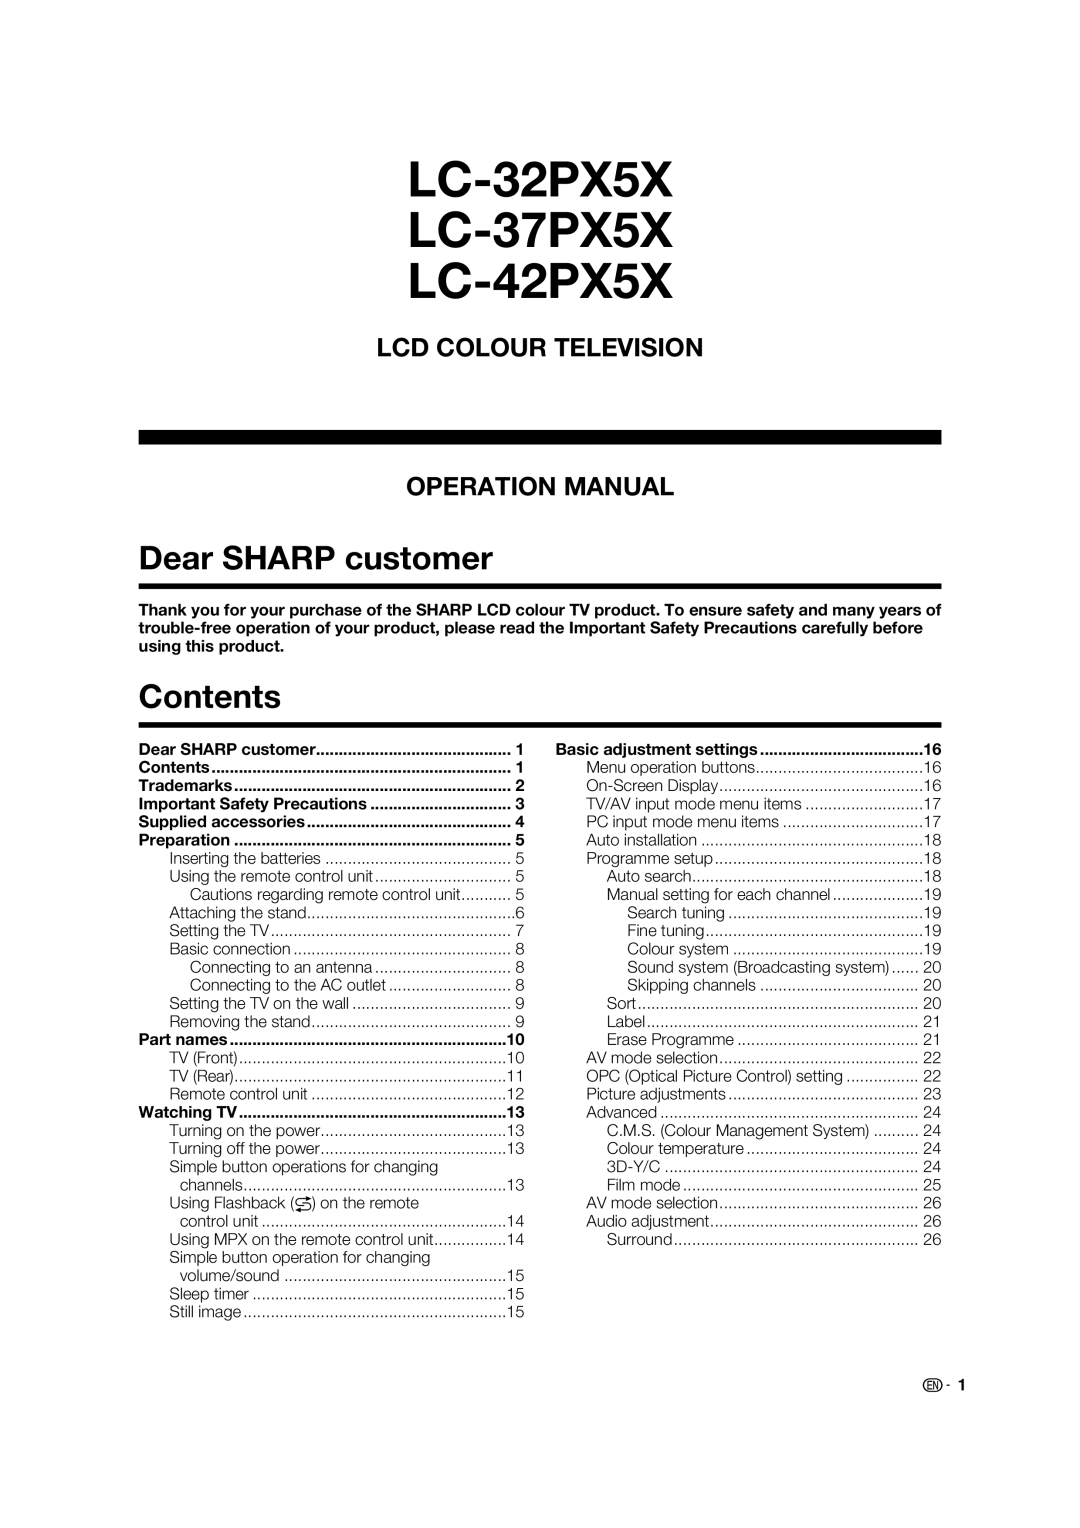 Sharp LC-42PX5X, LC-32PX5X, LC-37PX5X operation manual Dear Sharp customer, Contents 